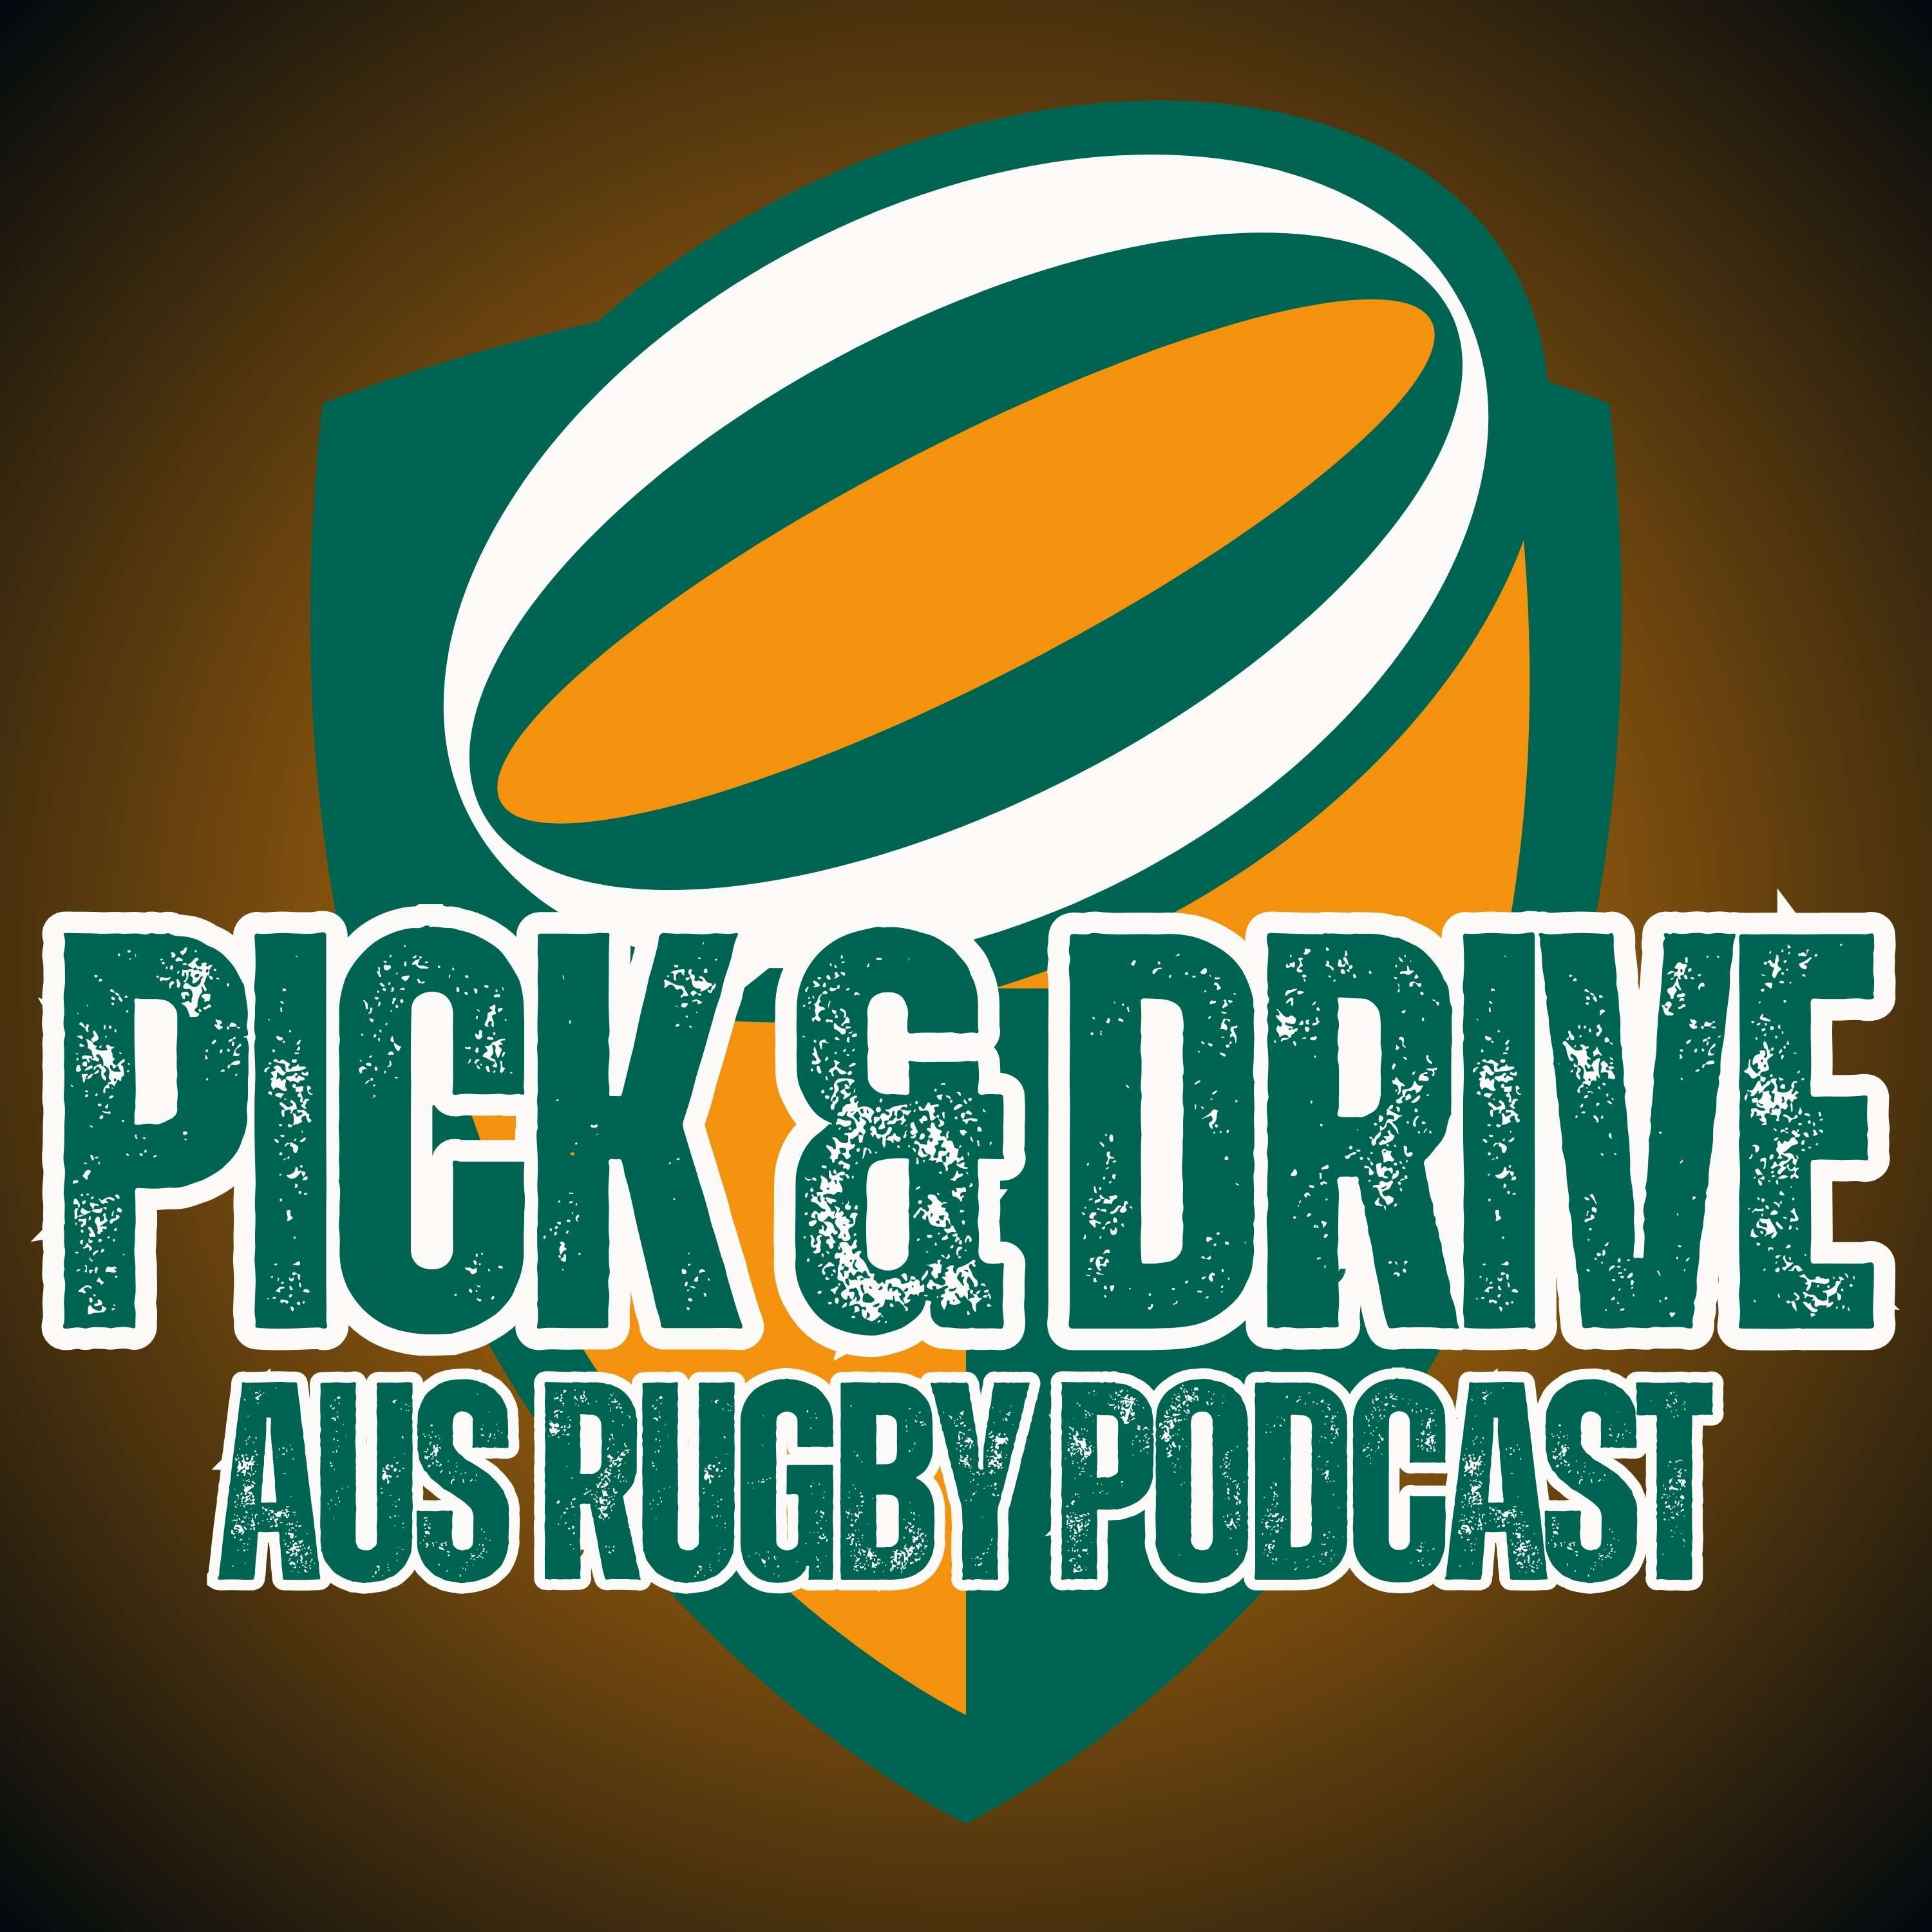 Pick and Drive Rugby Podcast